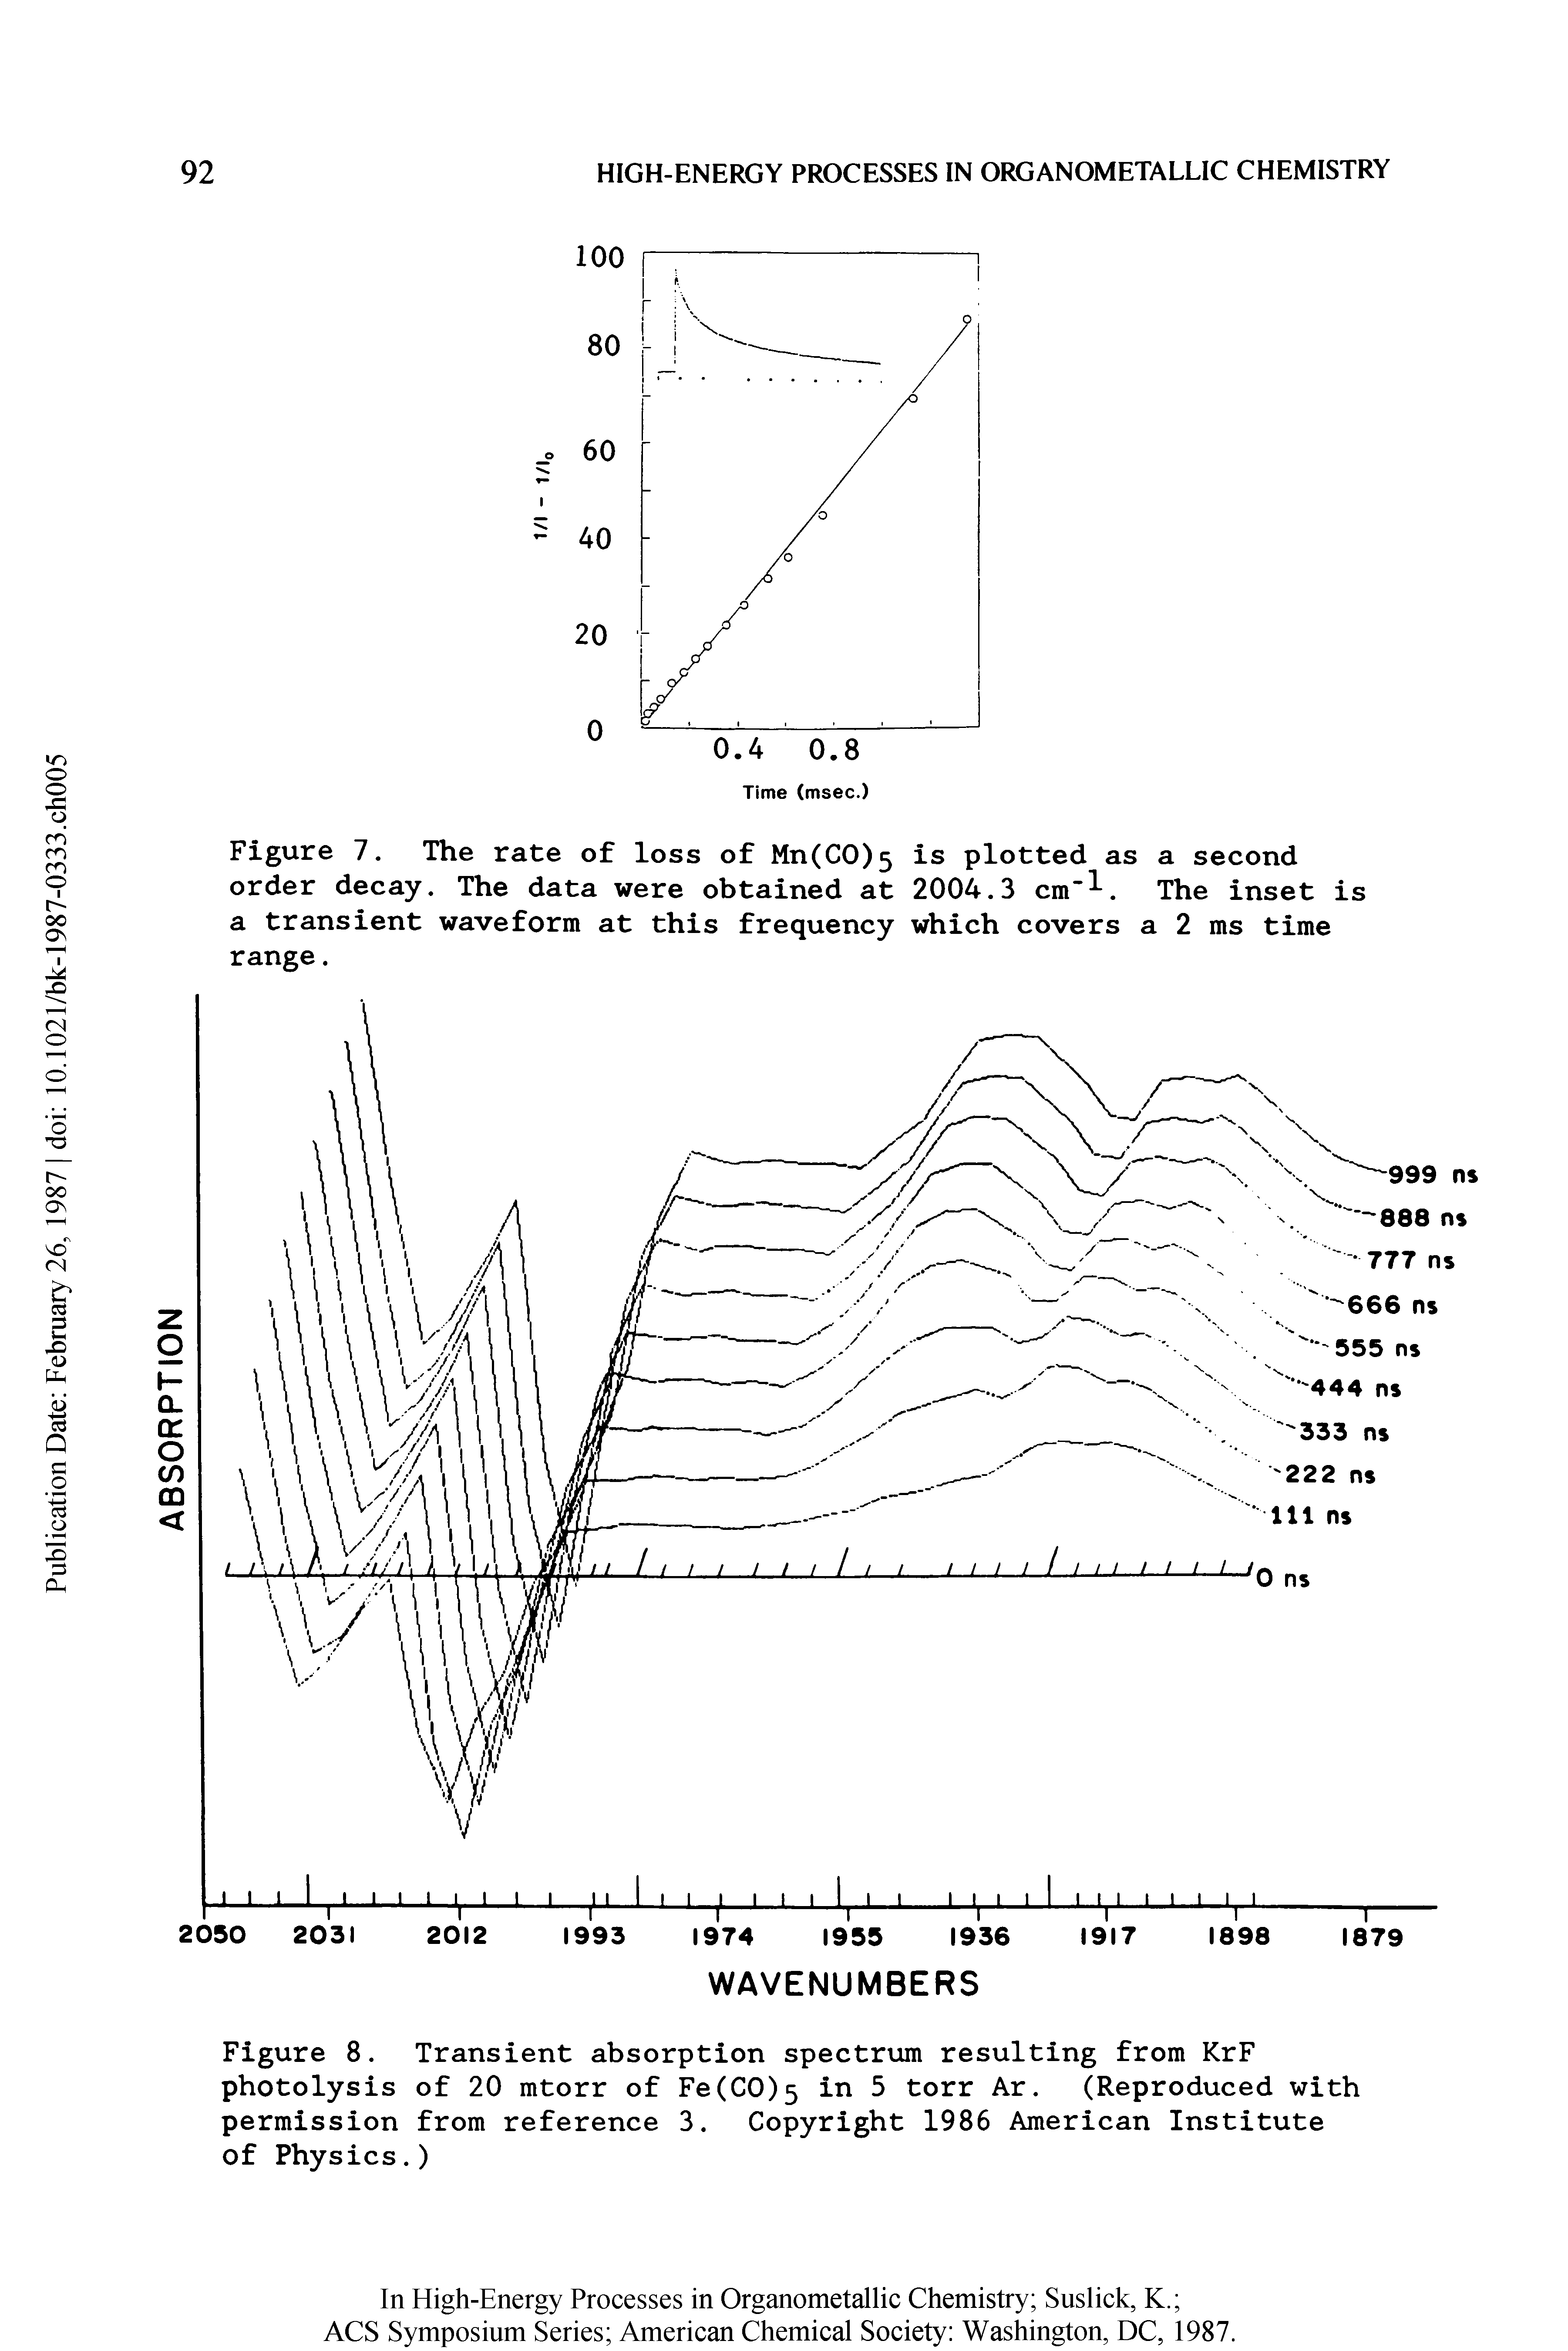 Figure 7. The rate of loss of Mn(C0)5 is plotted as a second order decay. The data were obtained at 2004.3 cm"1. The inset is a transient waveform at this frequency which covers a 2 ms time range.